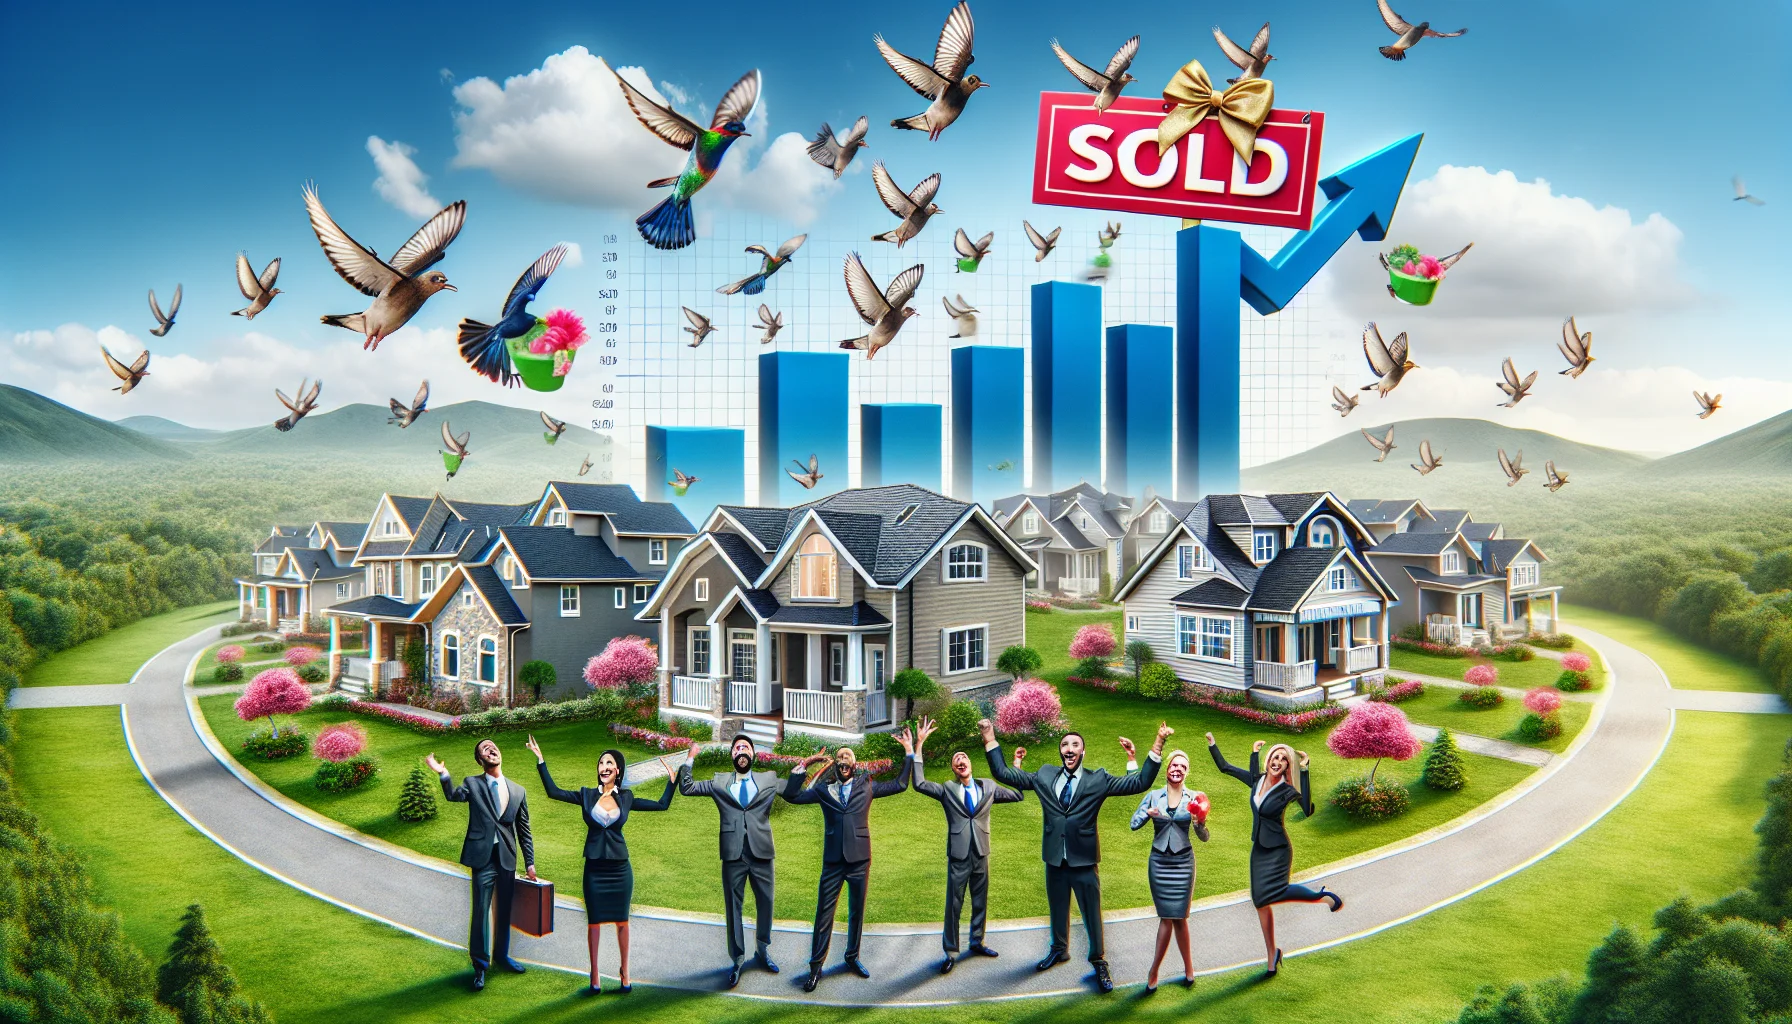 Create a humorous, ultra-realistic image where everything is just perfect in the world of real-estate. Picture an idyllic setting with pristine houses all in a row, manicured lawns, clear skies, and a big 'sold' sign with a bow on it in front of every house. Real-estate agents, a mix of men and women of various descents - Caucasian, Hispanic, Black, Middle-Eastern, South Asian, are celebrating their success with a giant animated chart showing soaring property values. Somehow, even the birds are chirping in a pattern that spells out 'real-estate boom'.